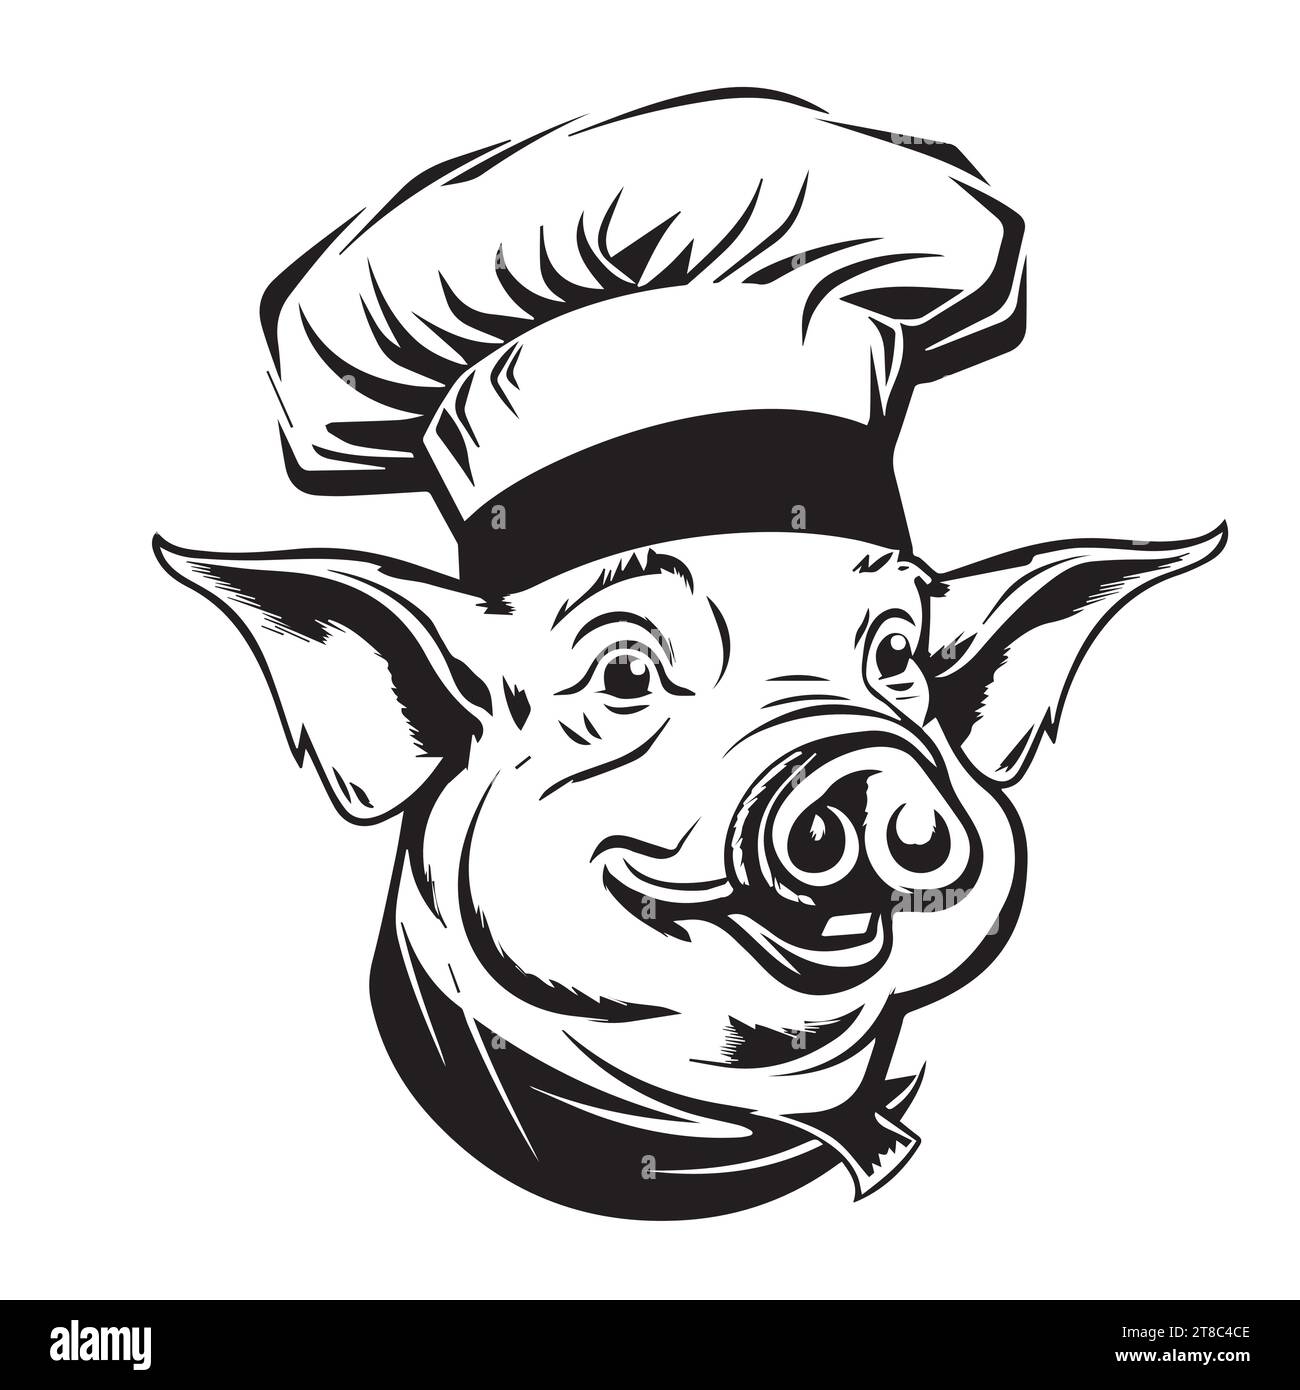 Pock Piggy Vector Logo Cartoon Character. A cute and modern Pork Barbeque Logo Illustration. This could be used in barbeque stations, outdoor bbq, grill, restaurant, steakhouse and etc. Stock Vector